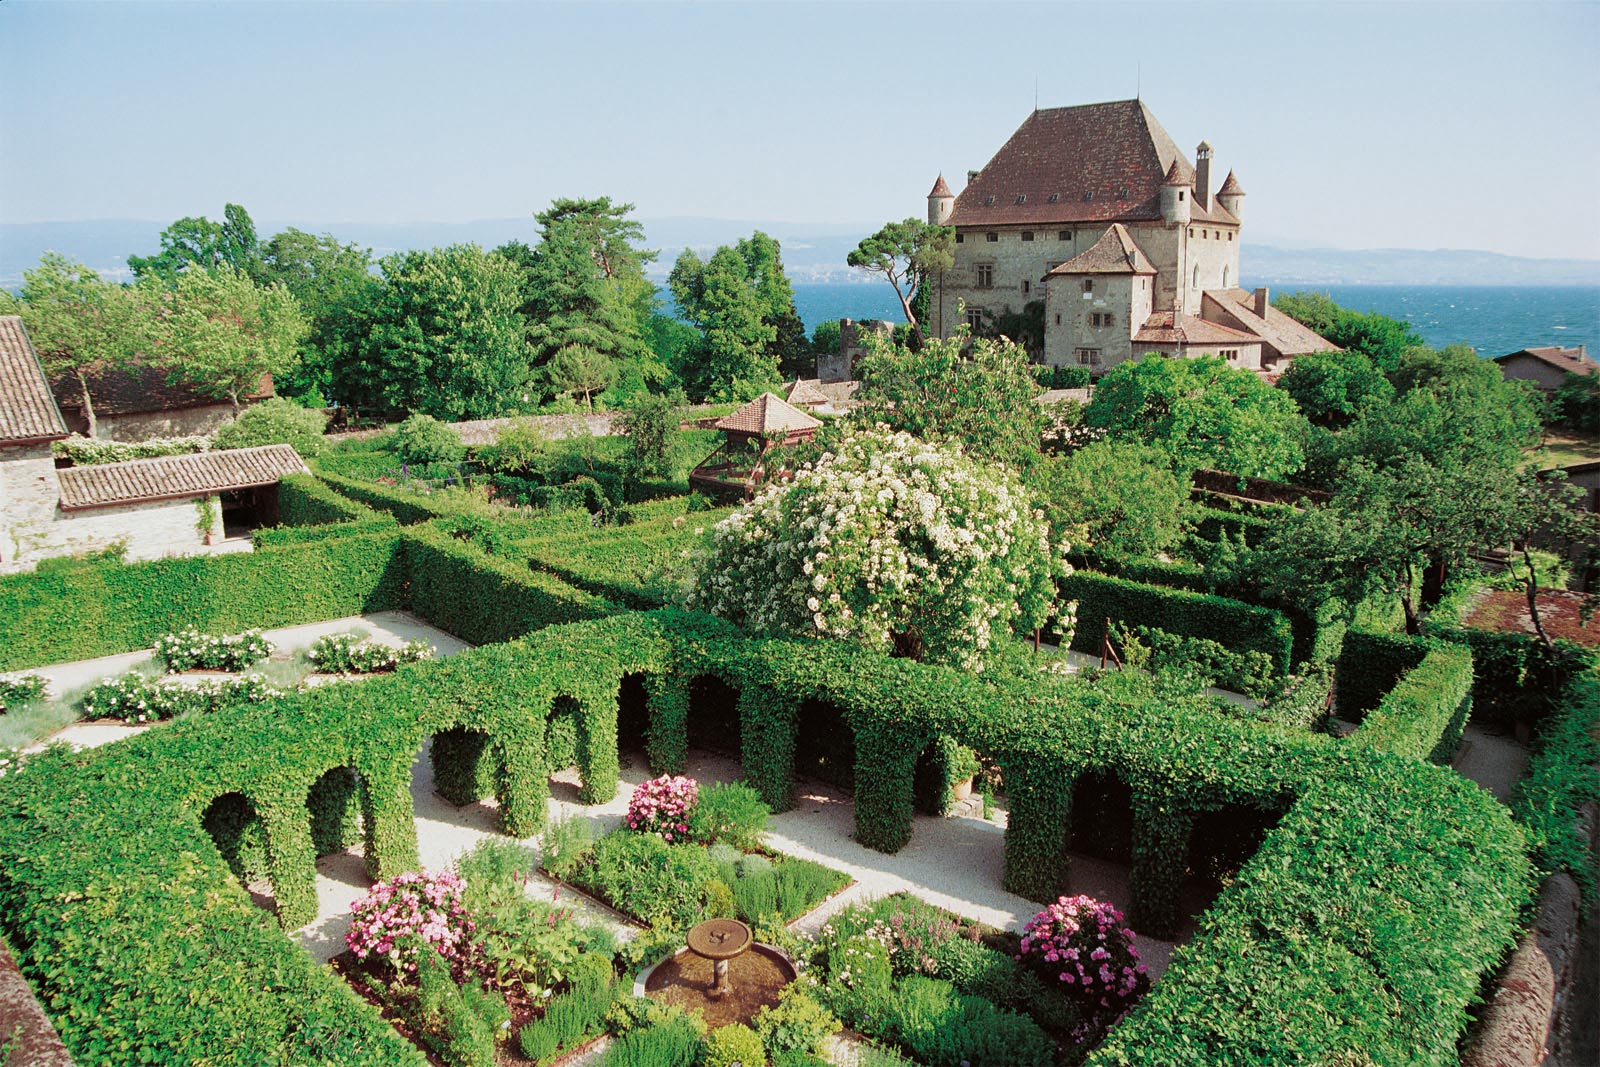 The Labyrinth of Five Senses in Yvoire: the cloister.